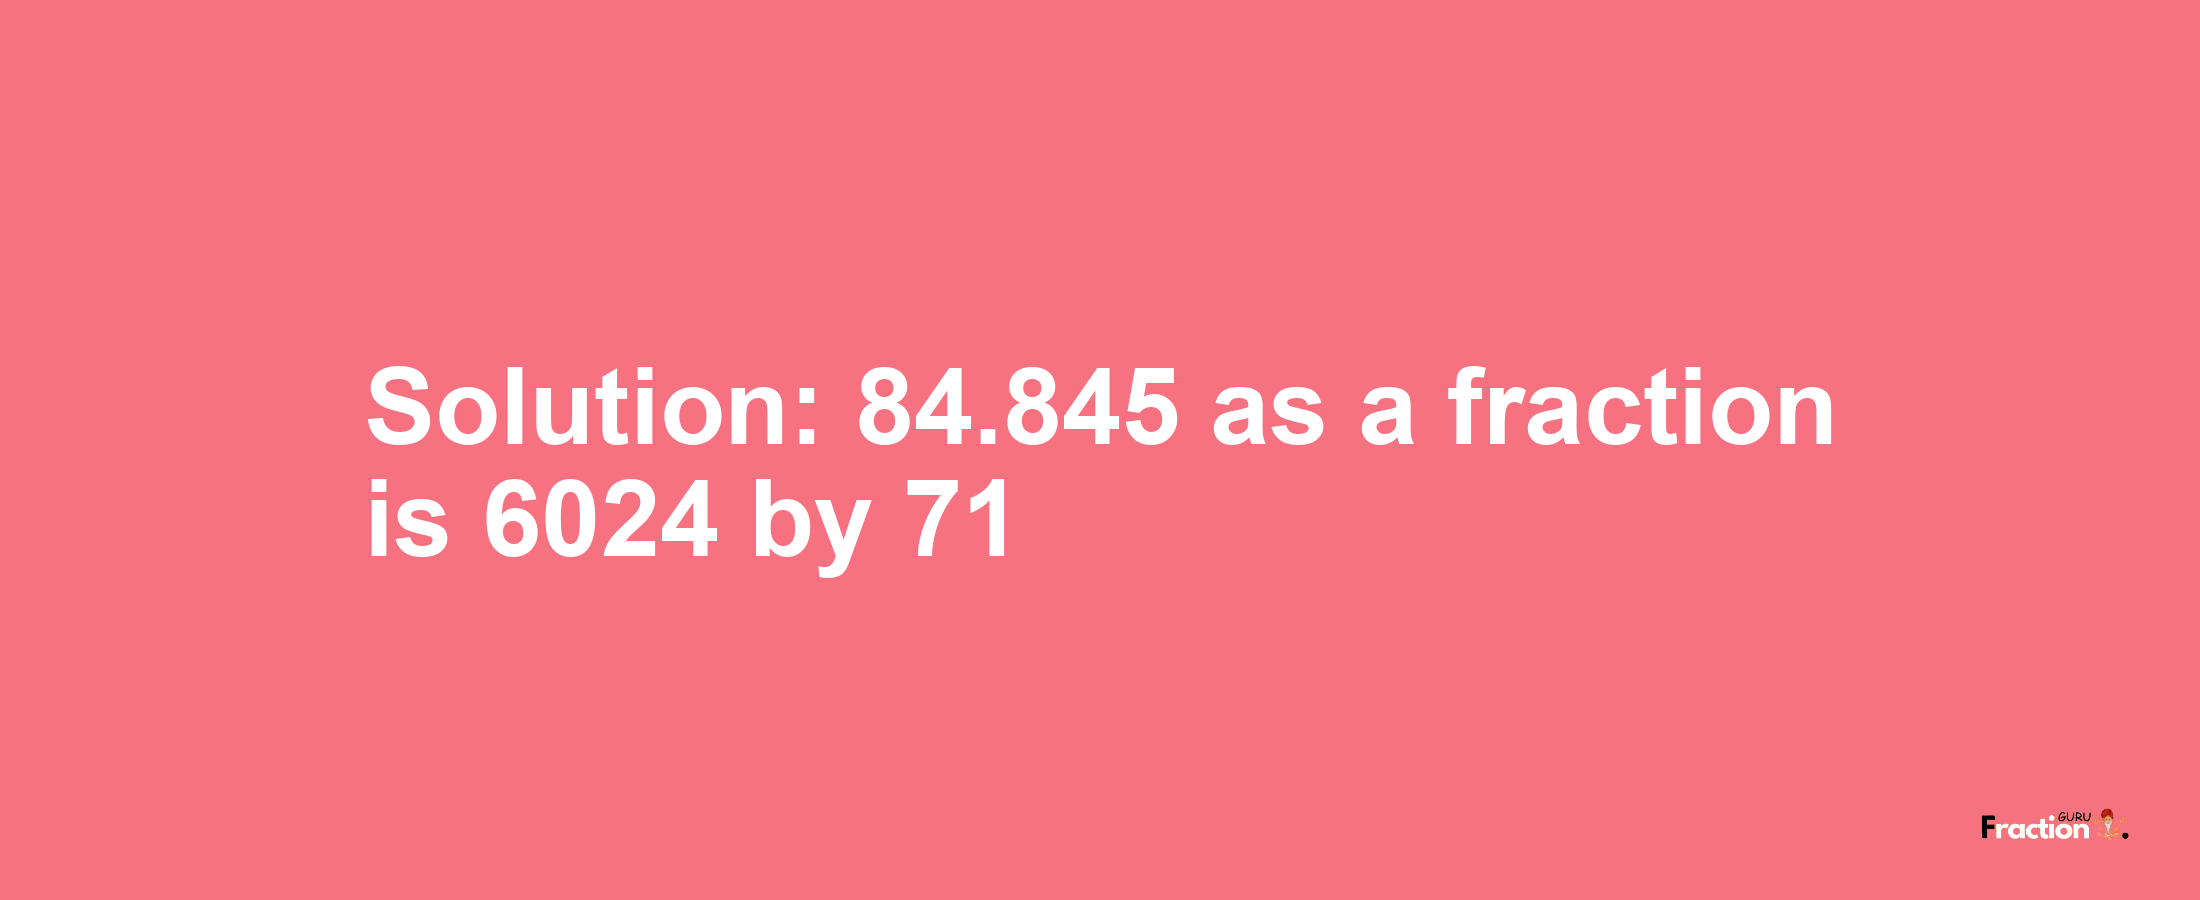 Solution:84.845 as a fraction is 6024/71